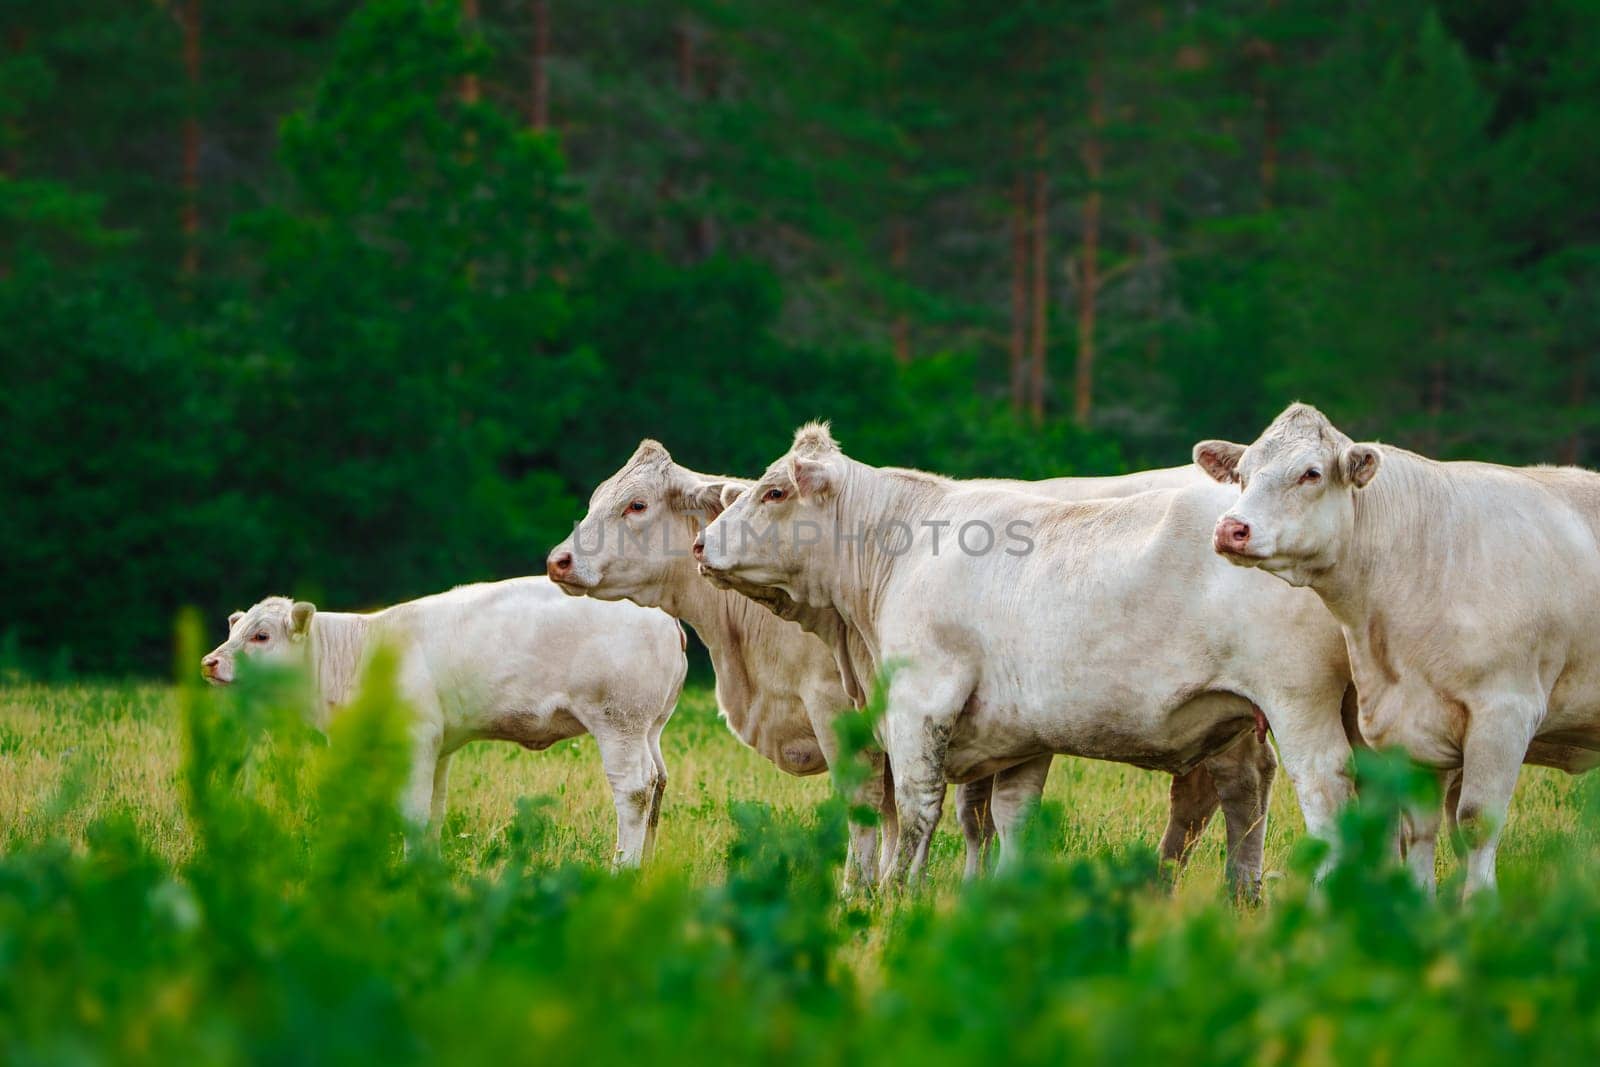 Capturing the peaceful essence of rural life, white French meat cows rest and feed on the lush, green grass under the bright sunshine of a beautiful summer day